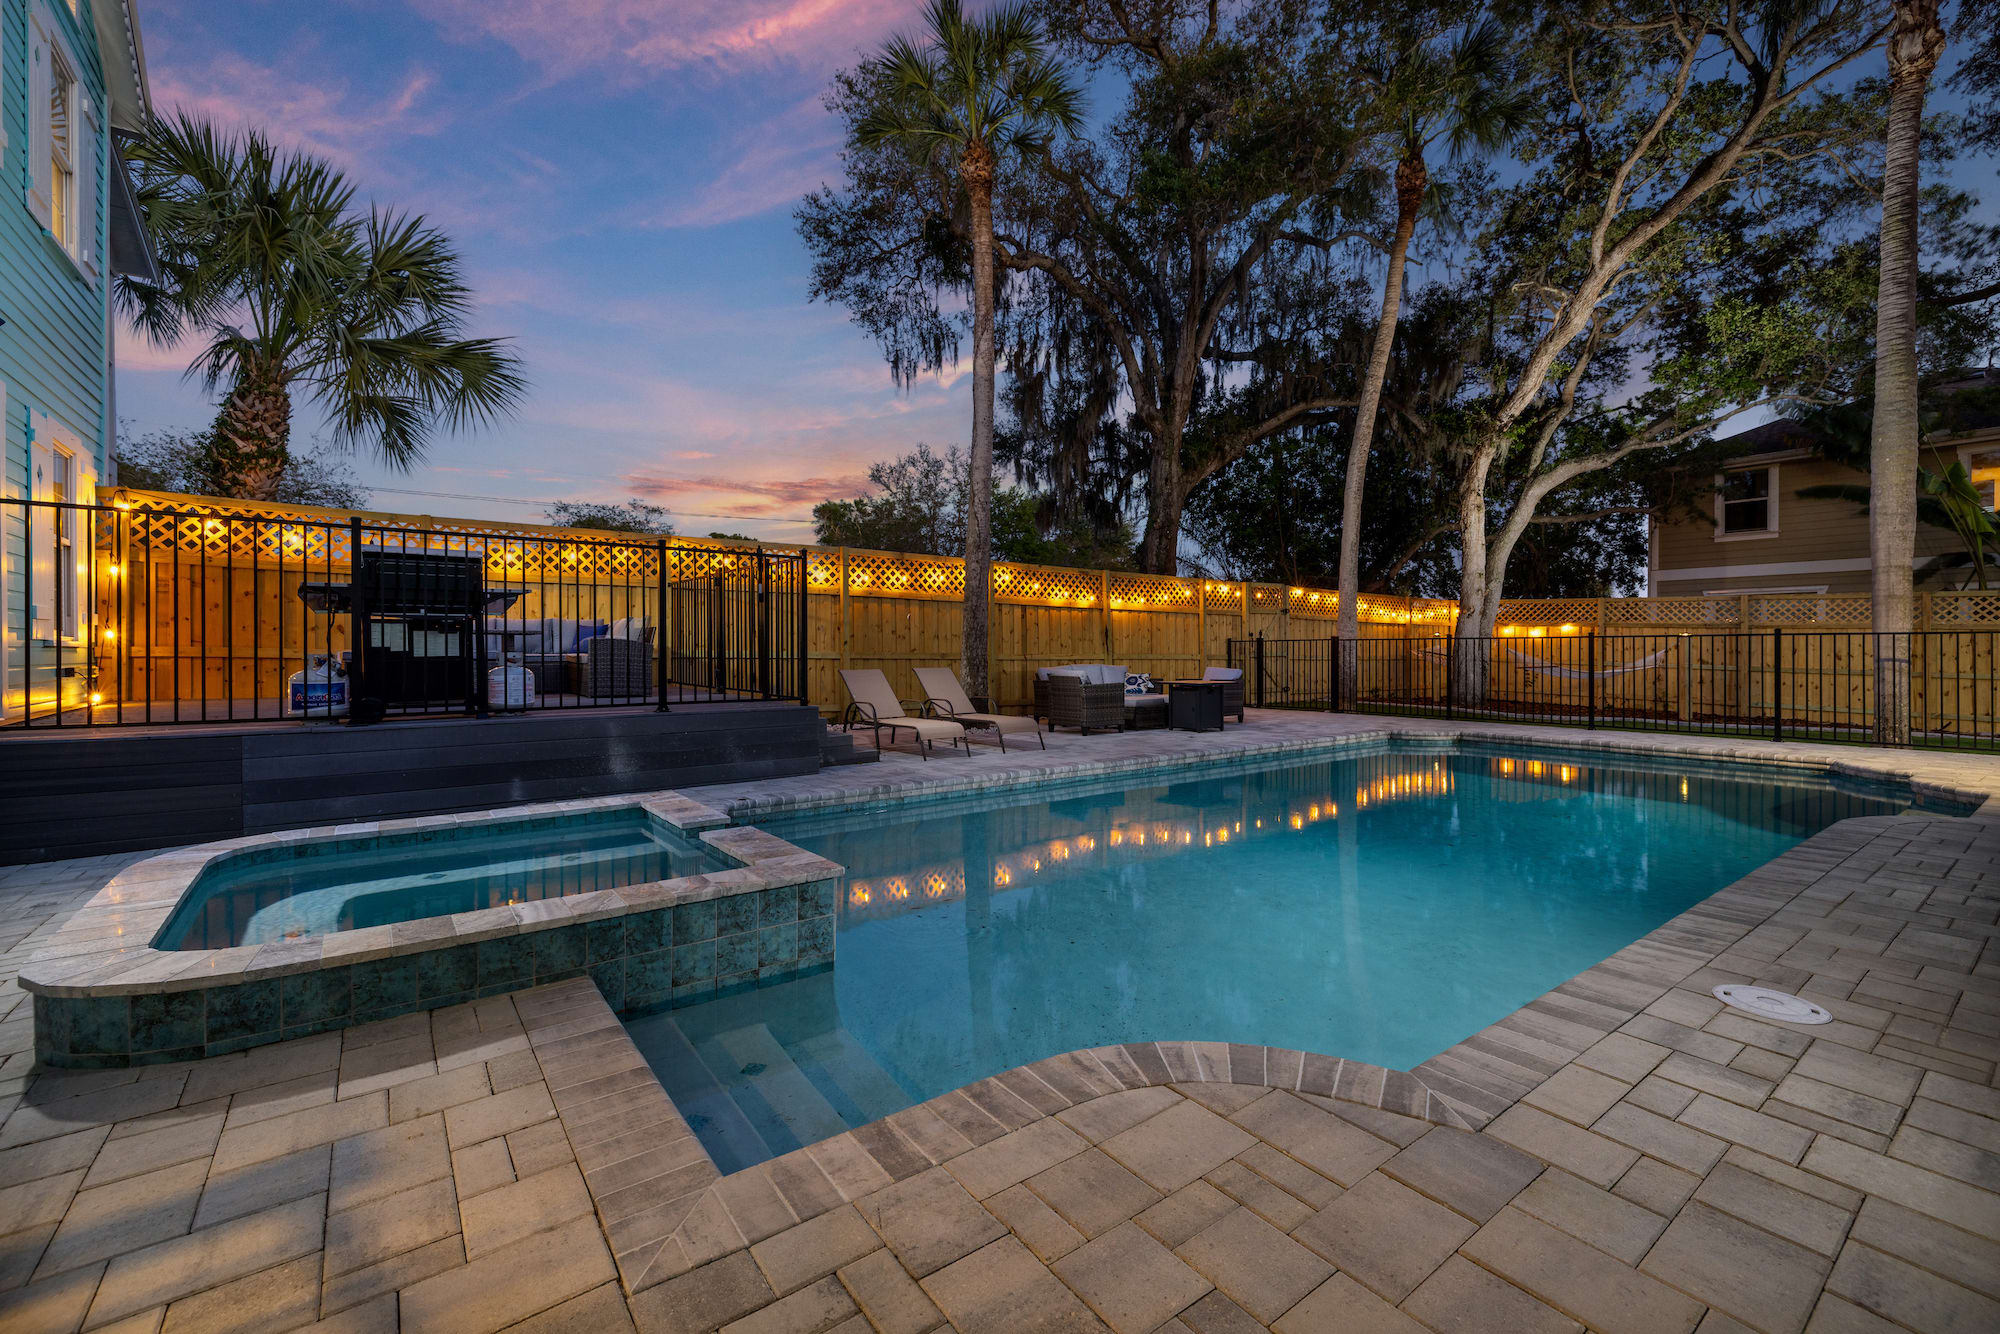 Relax by the pool in the beautiful Florida evenings